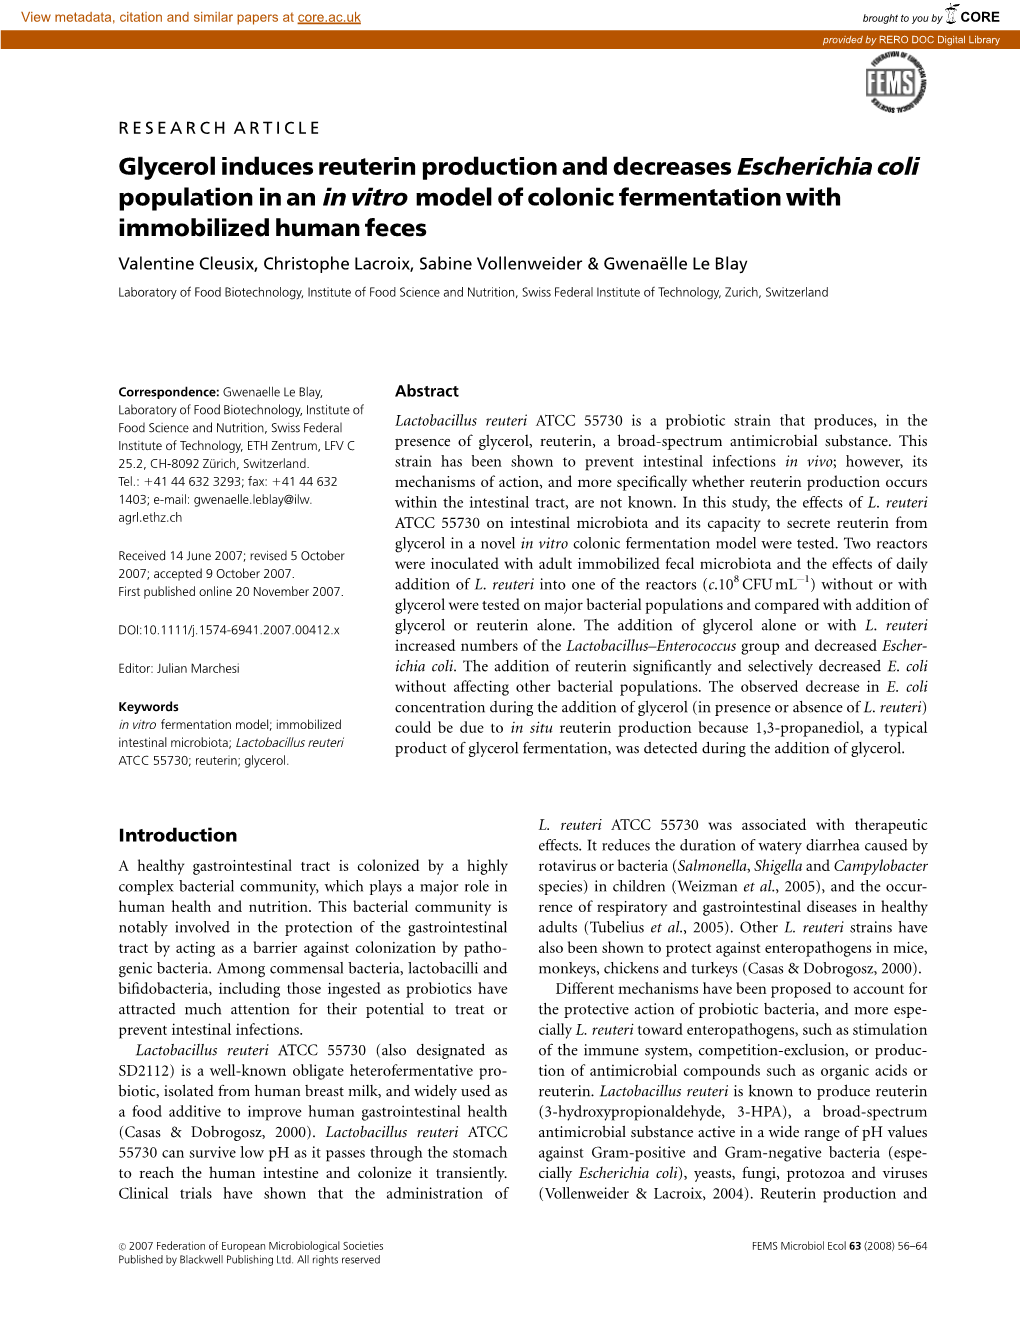 Glycerol Induces Reuterin Production and Decreases Escherichia Coli Population in an in Vitro Model of Colonic Fermentation With